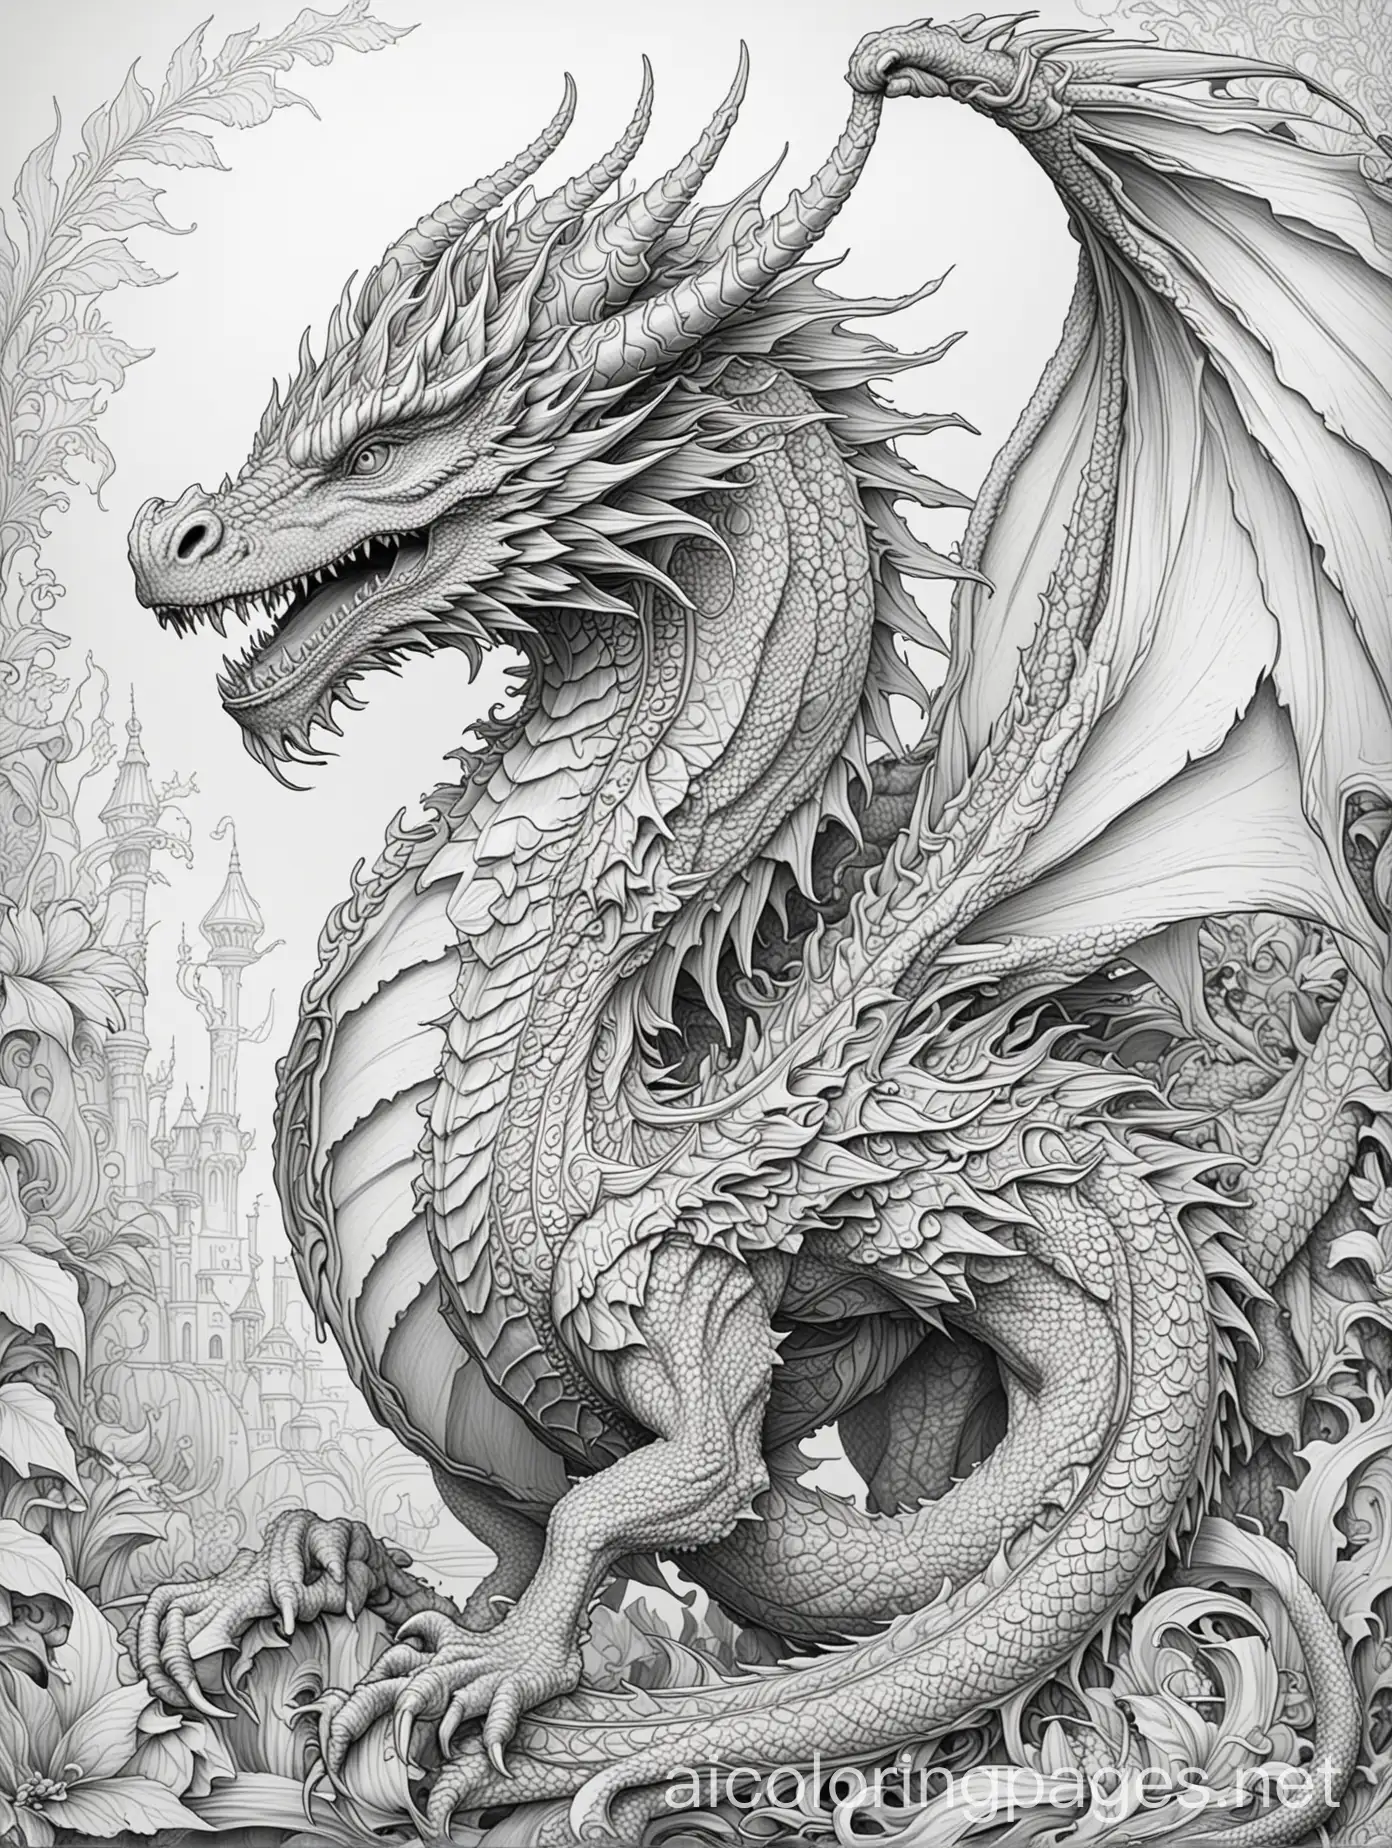 elaborate and intricate detailed regal full Vishap Dragon for adult coloring book, Coloring Page, black and white, line art, white background, Simplicity, Ample White Space. The background of the coloring page is plain white to make it easy for young children to color within the lines. The outlines of all the subjects are easy to distinguish, making it simple for kids to color without too much difficulty